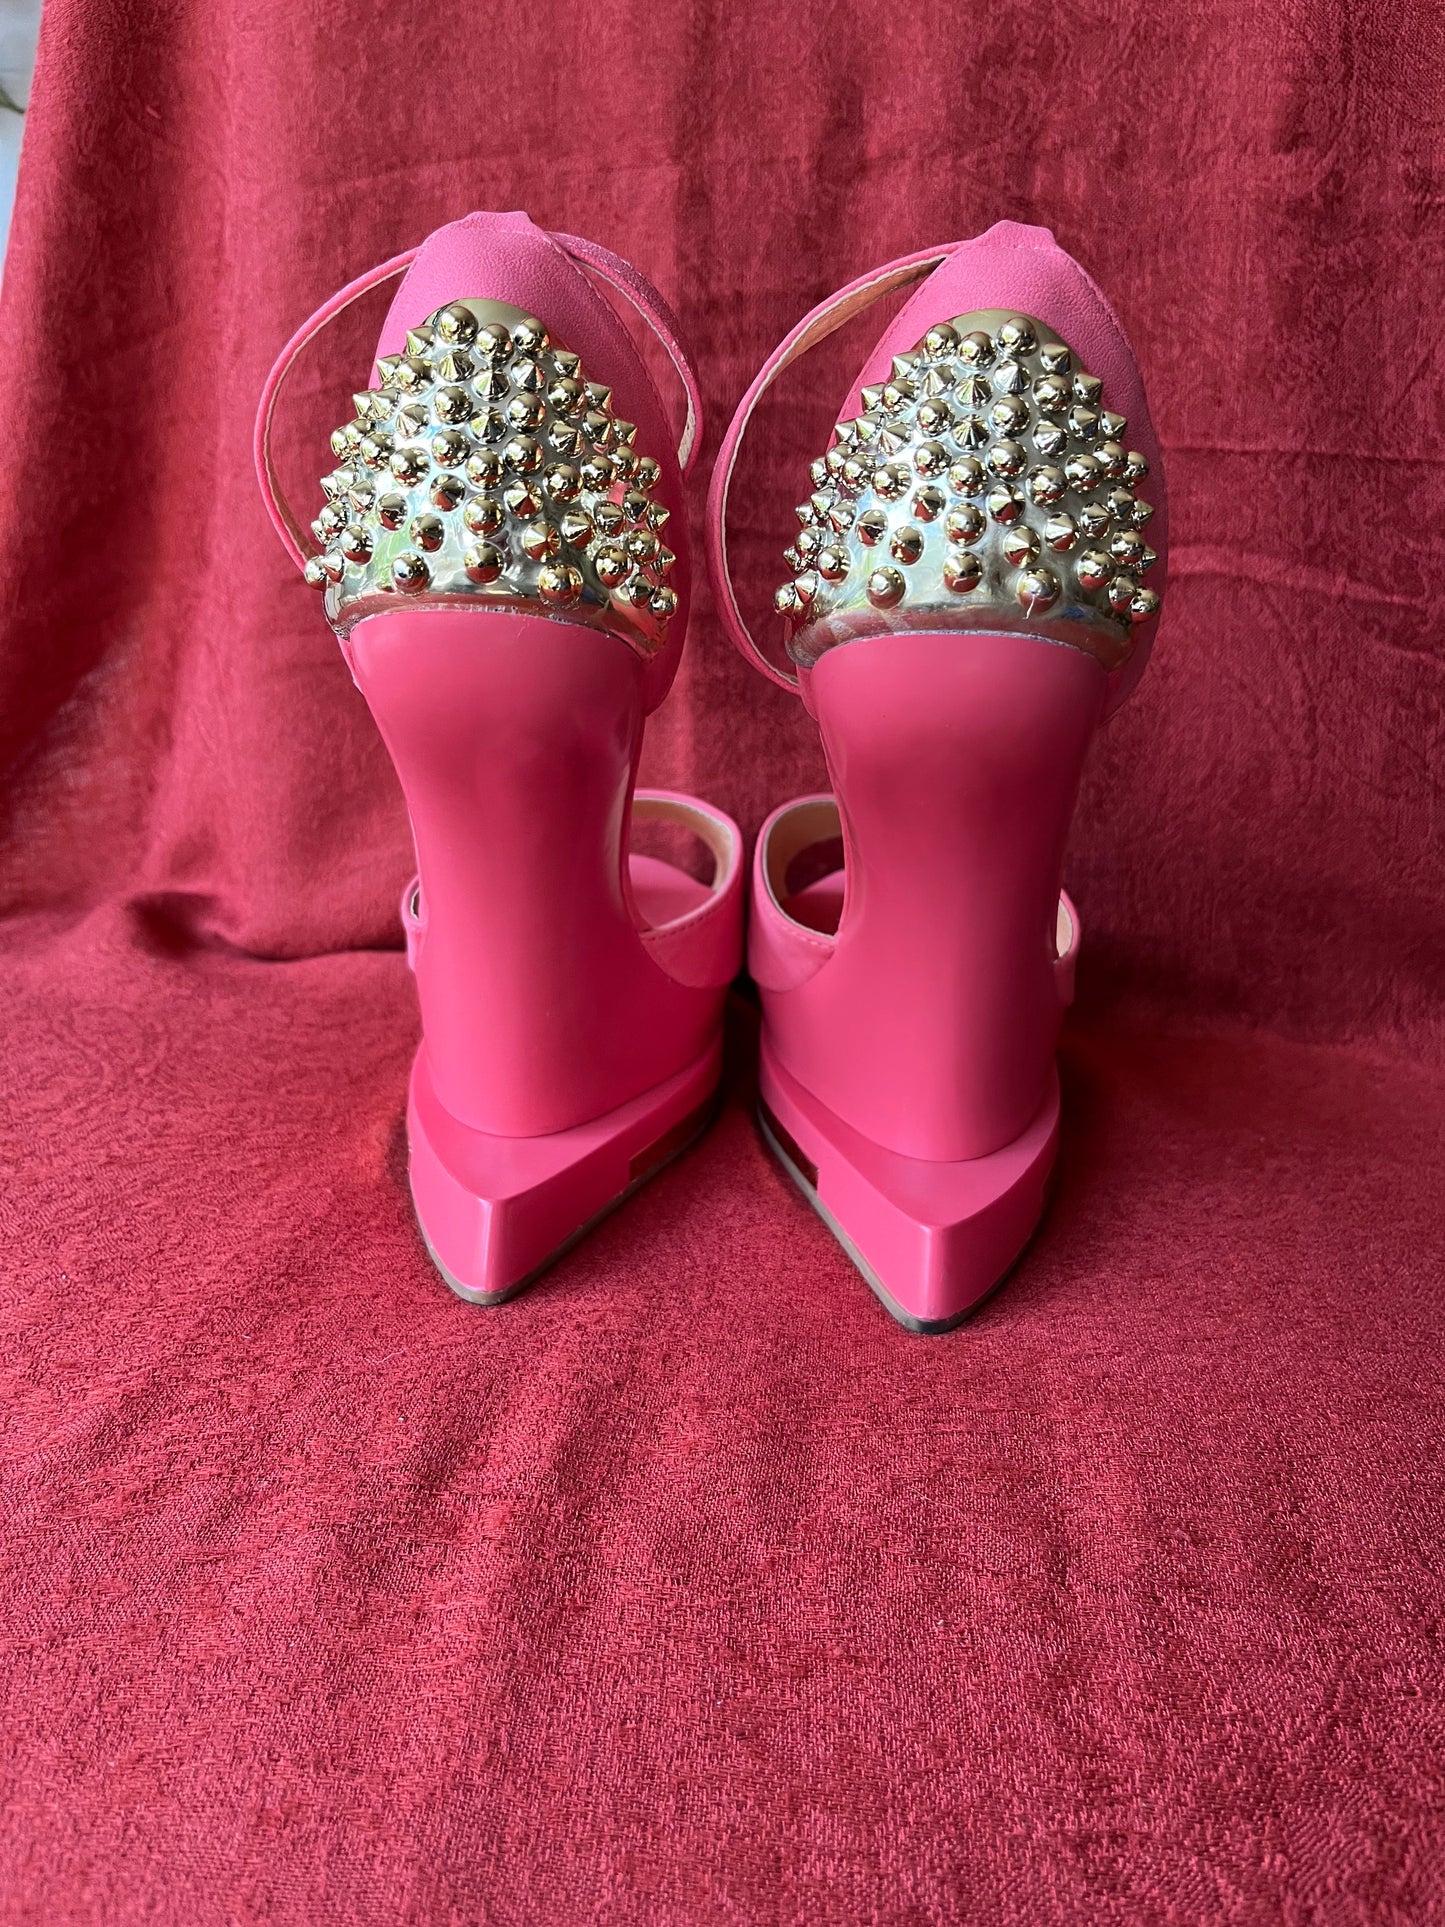 Pink Vinyl Statement High Heels with Gold Tone Spike Accents-Size 9